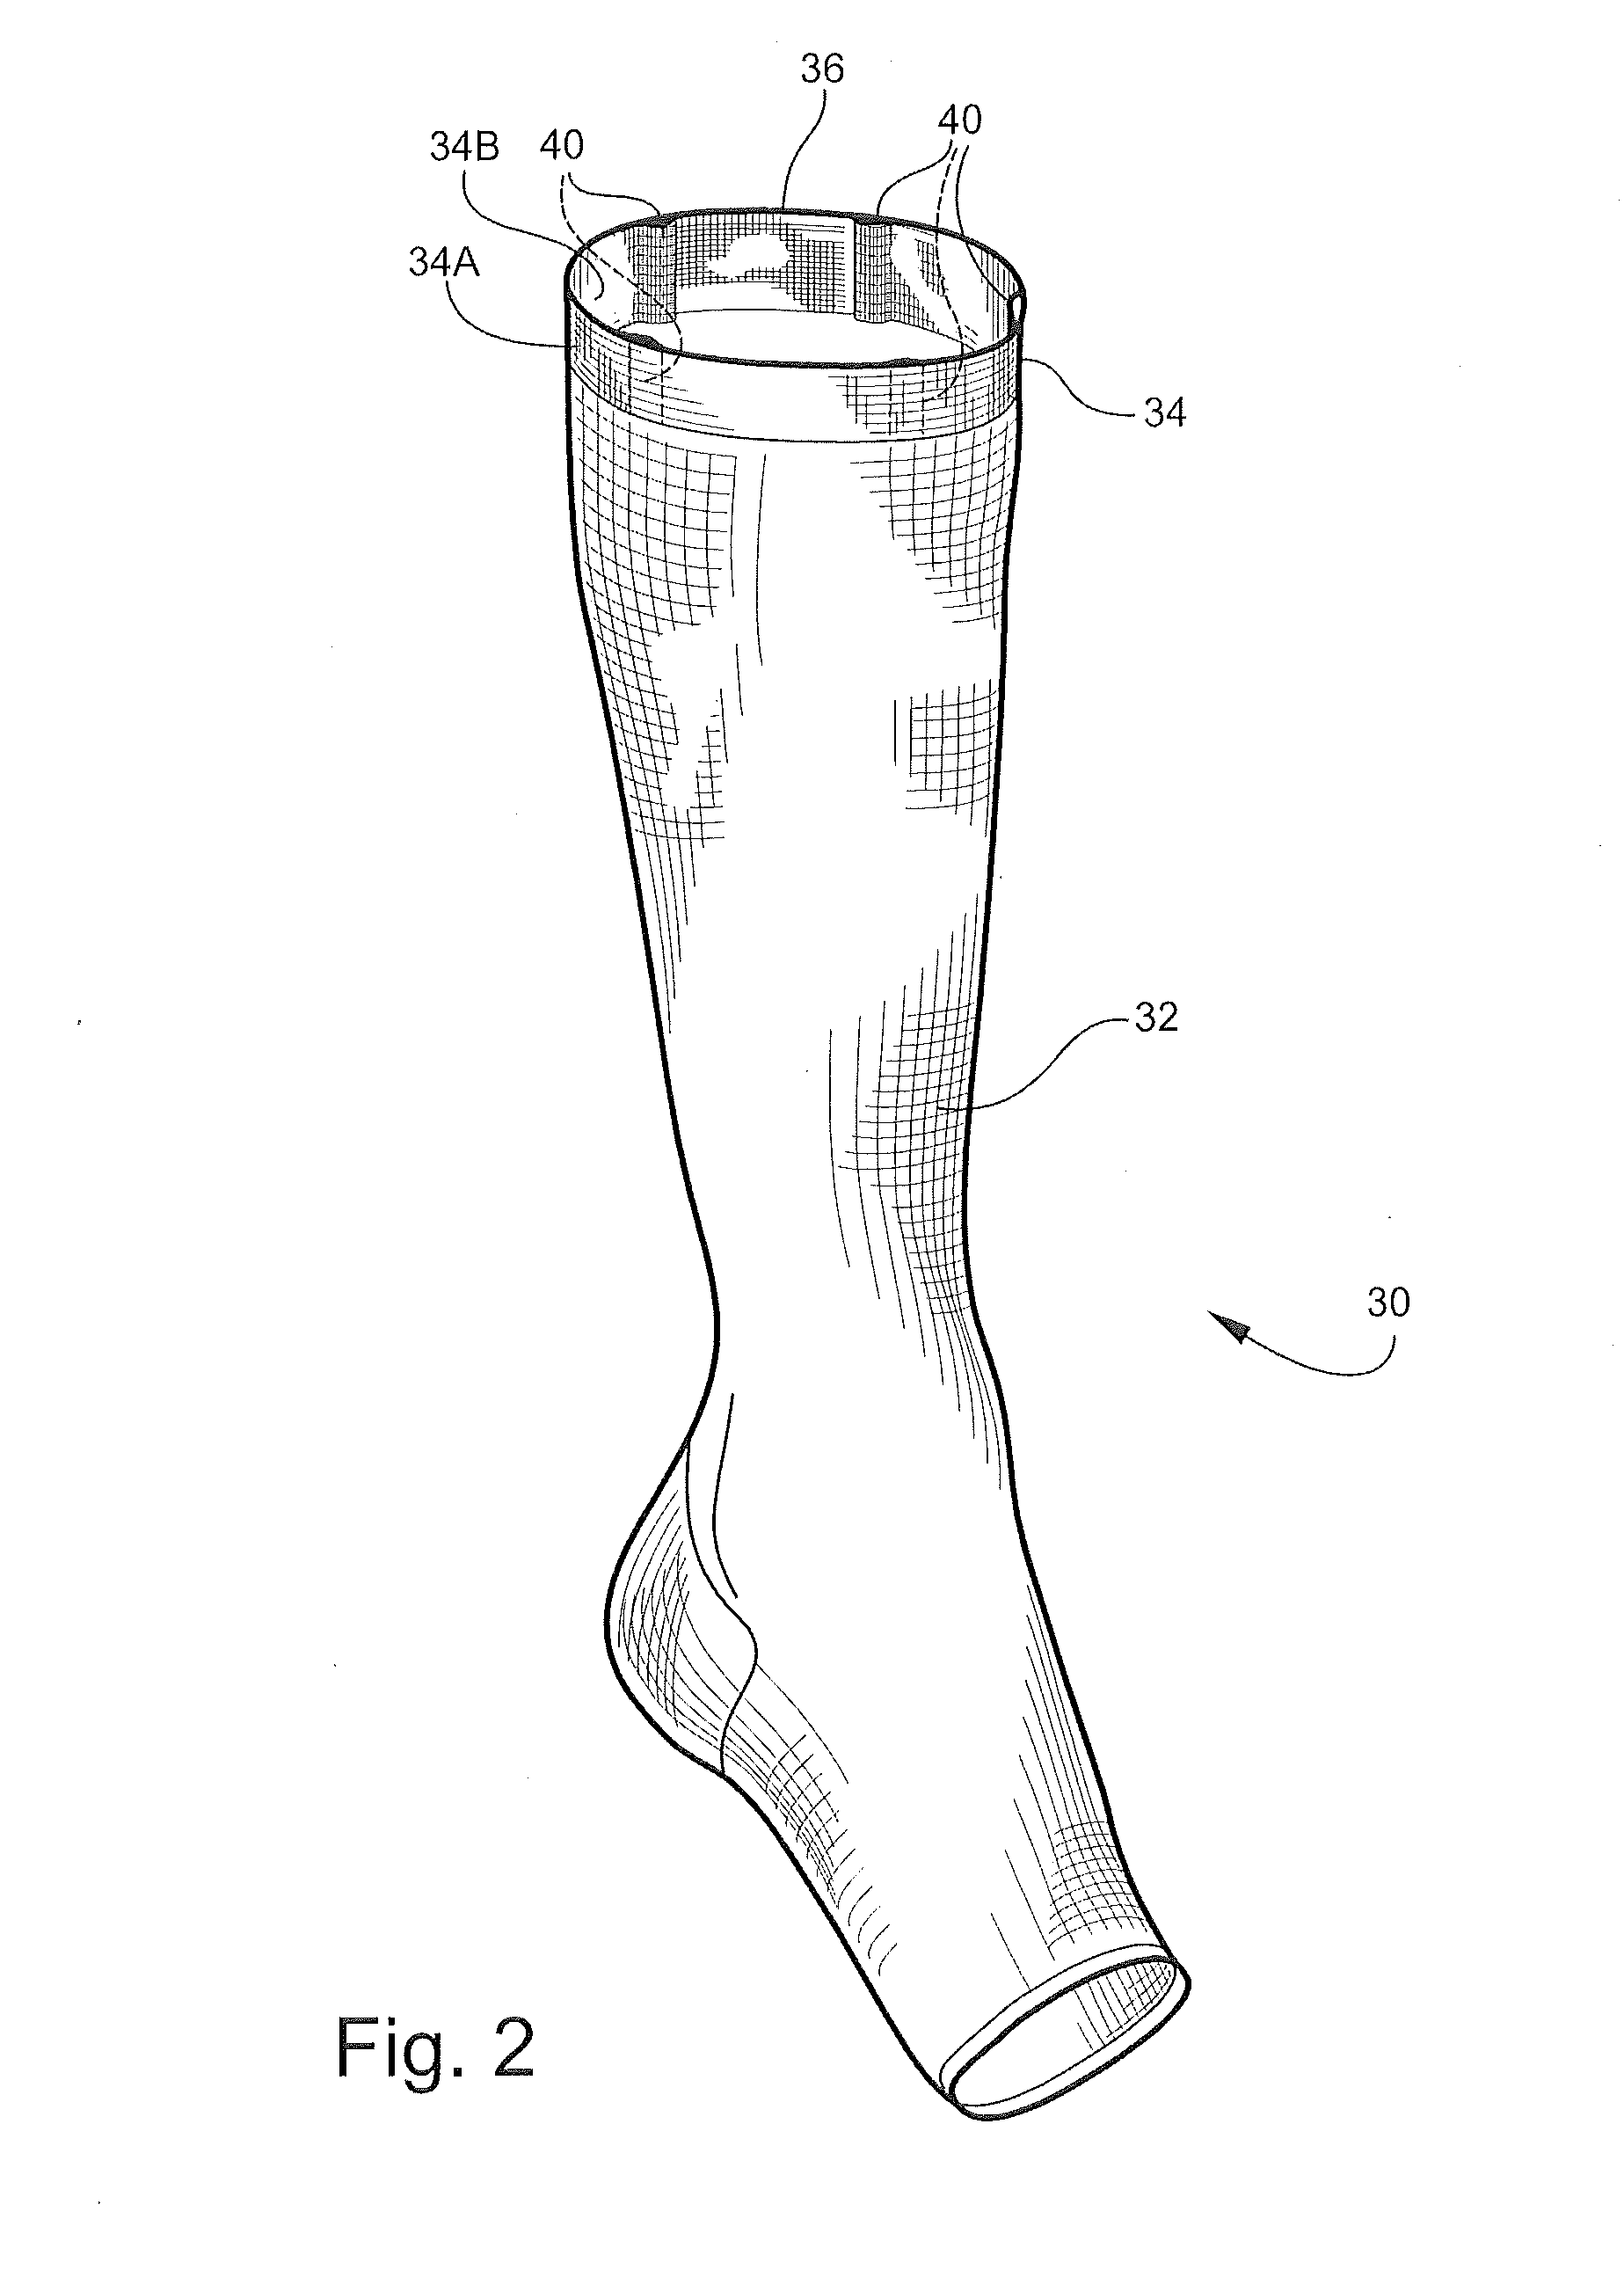 Therapeutic medical compression garment and method